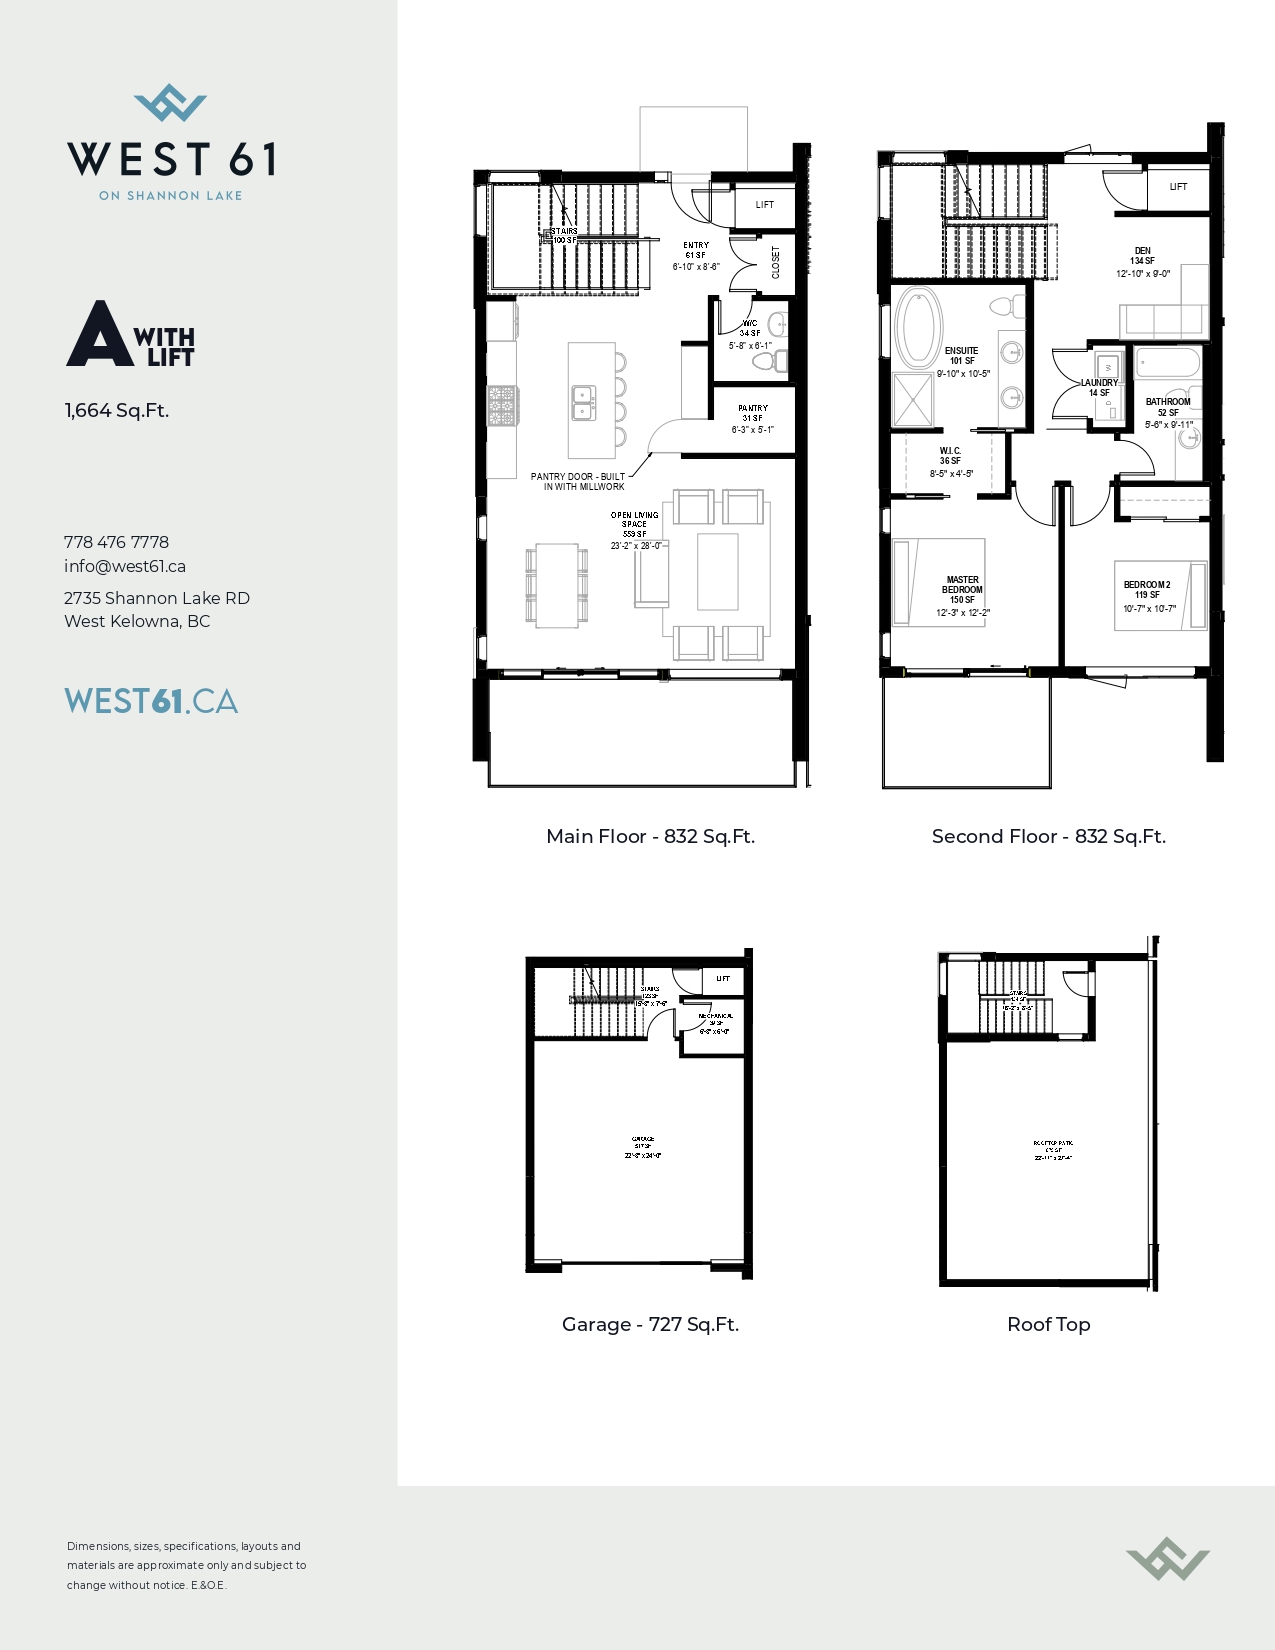 Brightshore Floor Plans-A with lift